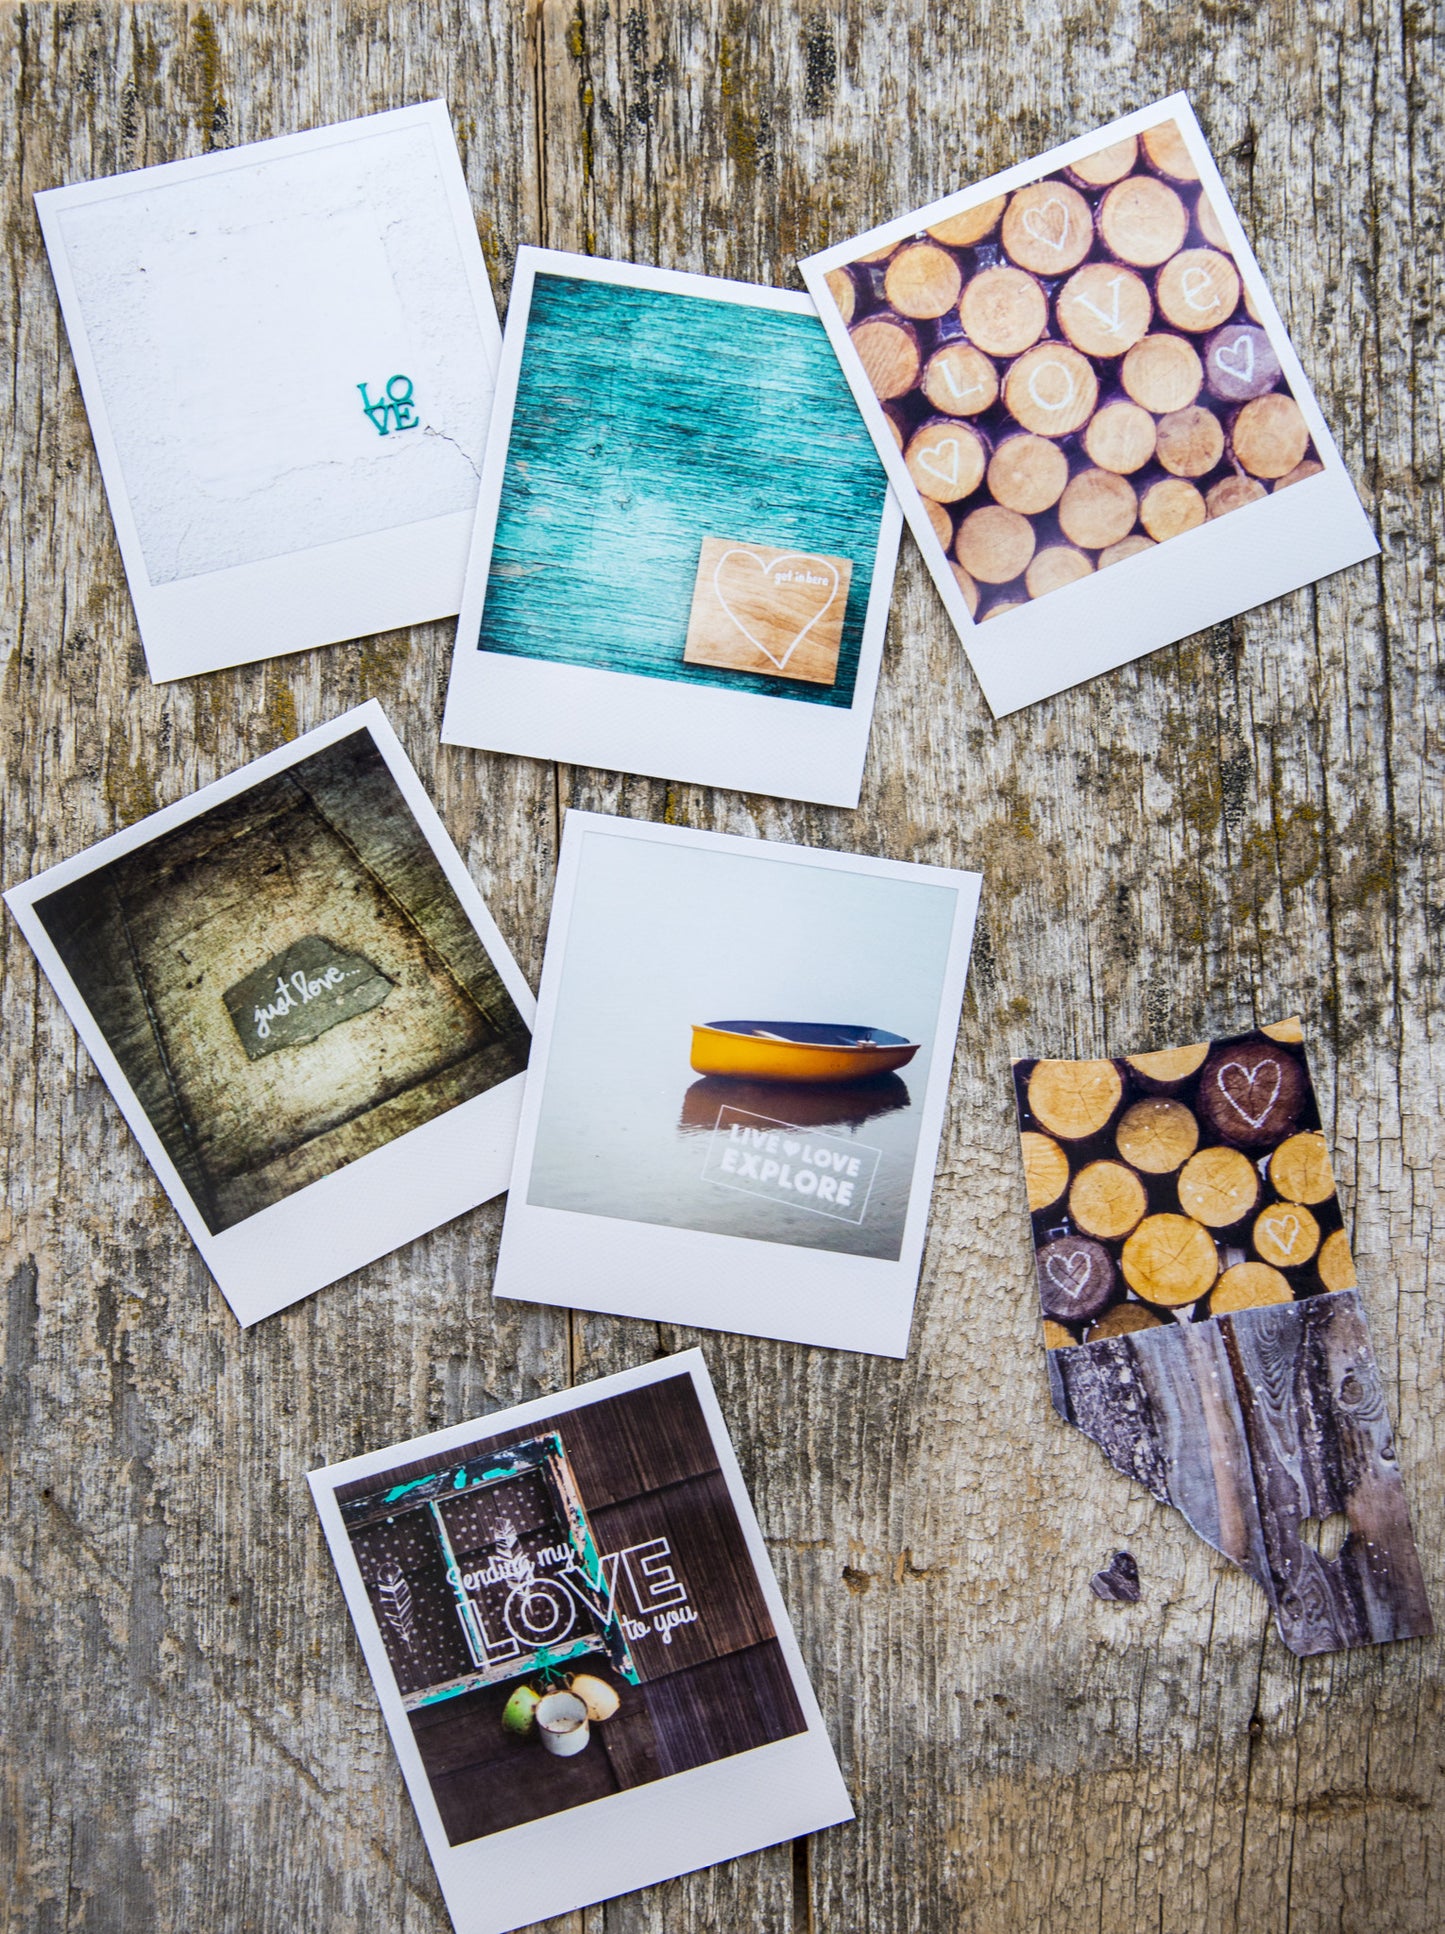 CLEARANCE <br> Metallic Polaroid Magnet <br>Poppies Along the Ocean